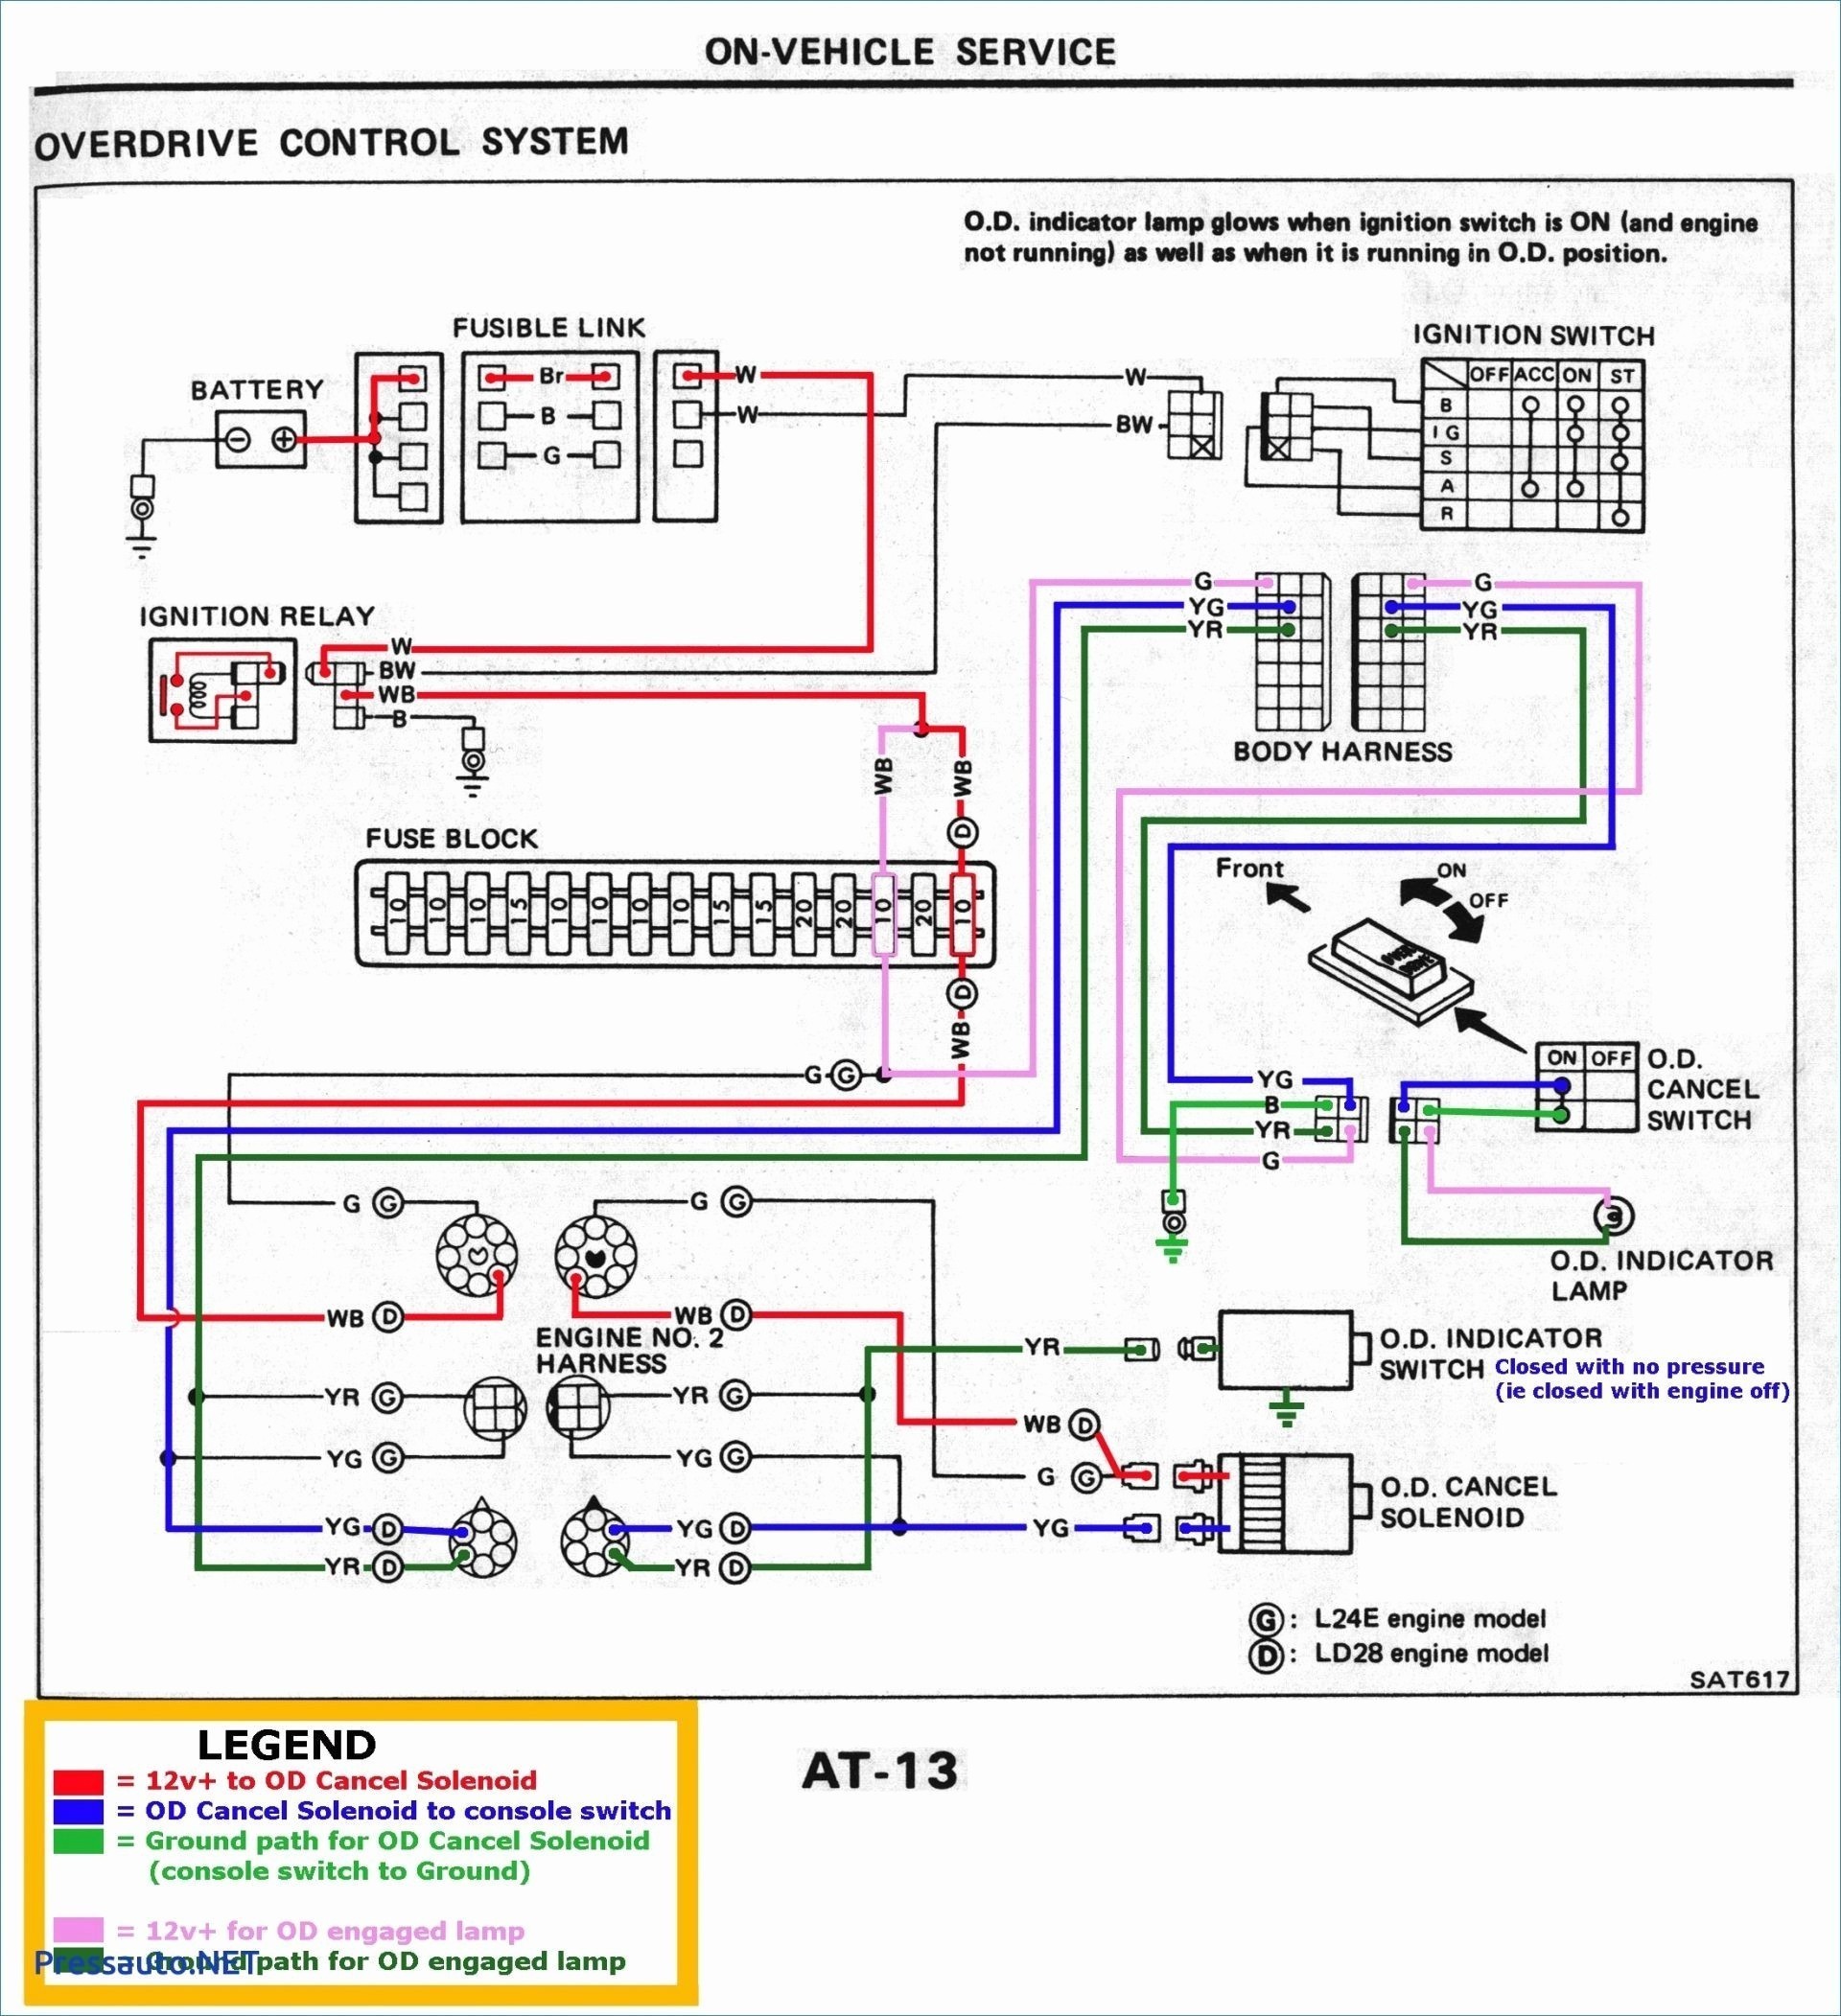 86 chevy alternator wiring diagram unique wiring diagram for johnson outboard ignition switch new alternator of 86 chevy alternator wiring diagram